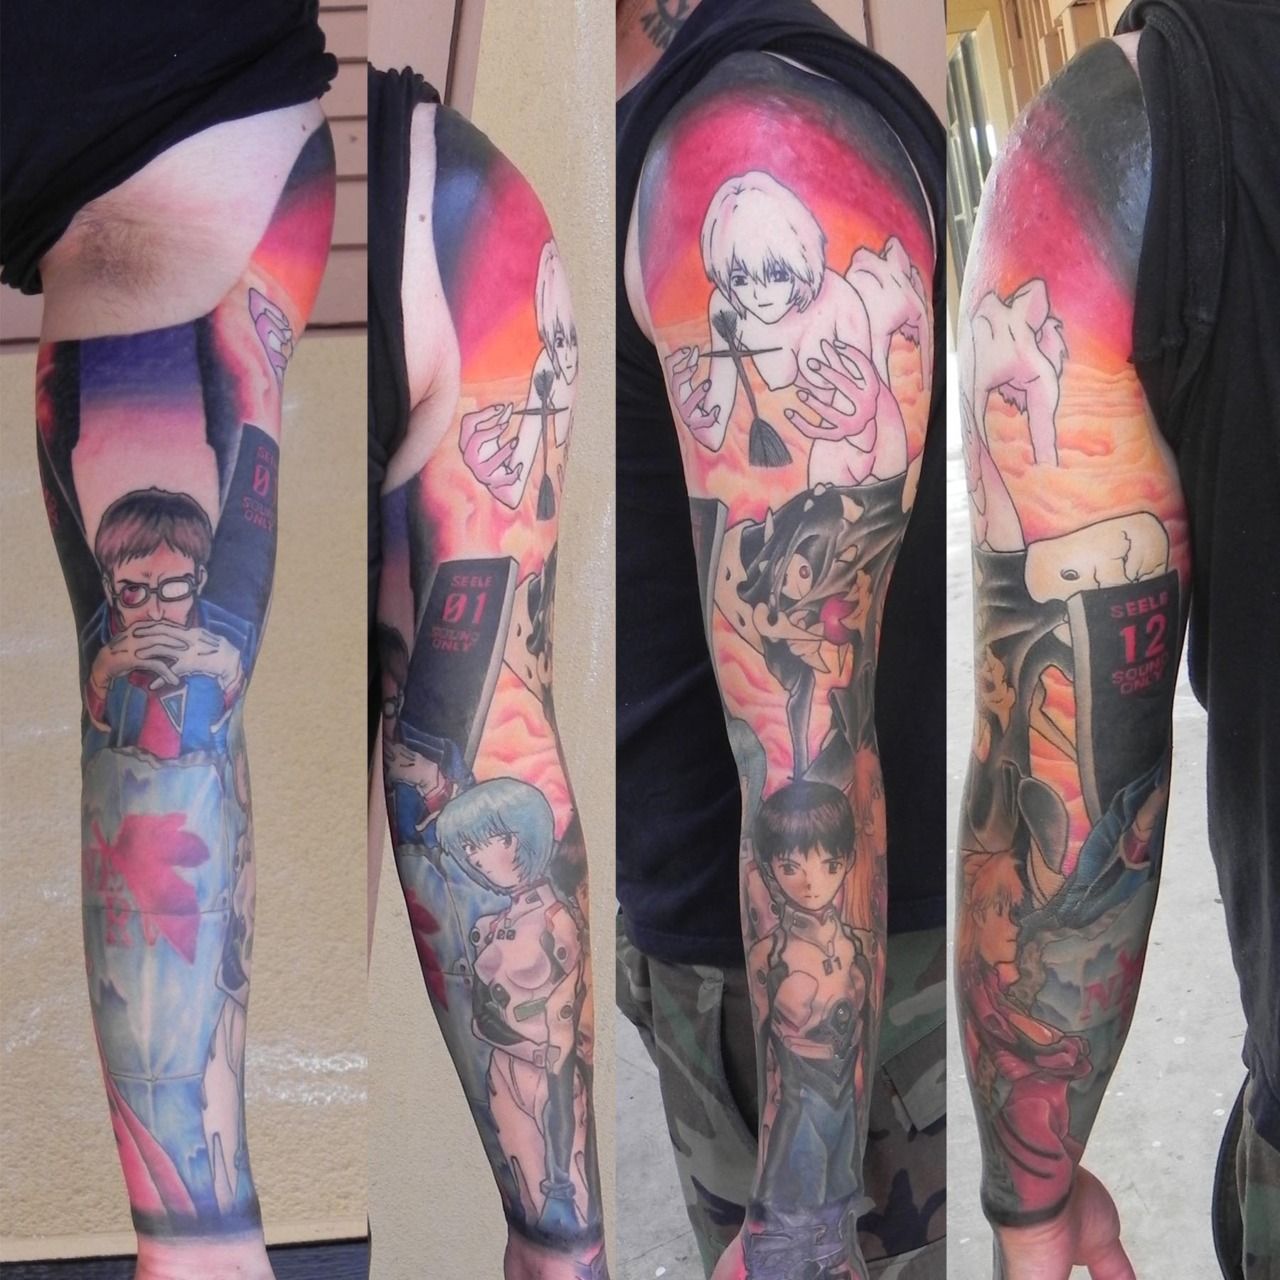 Awesome Anime Tattoo Ideas You Will Love  Anime Sleeve Tattoos Designs  That Are Seriously Epic  YouTube